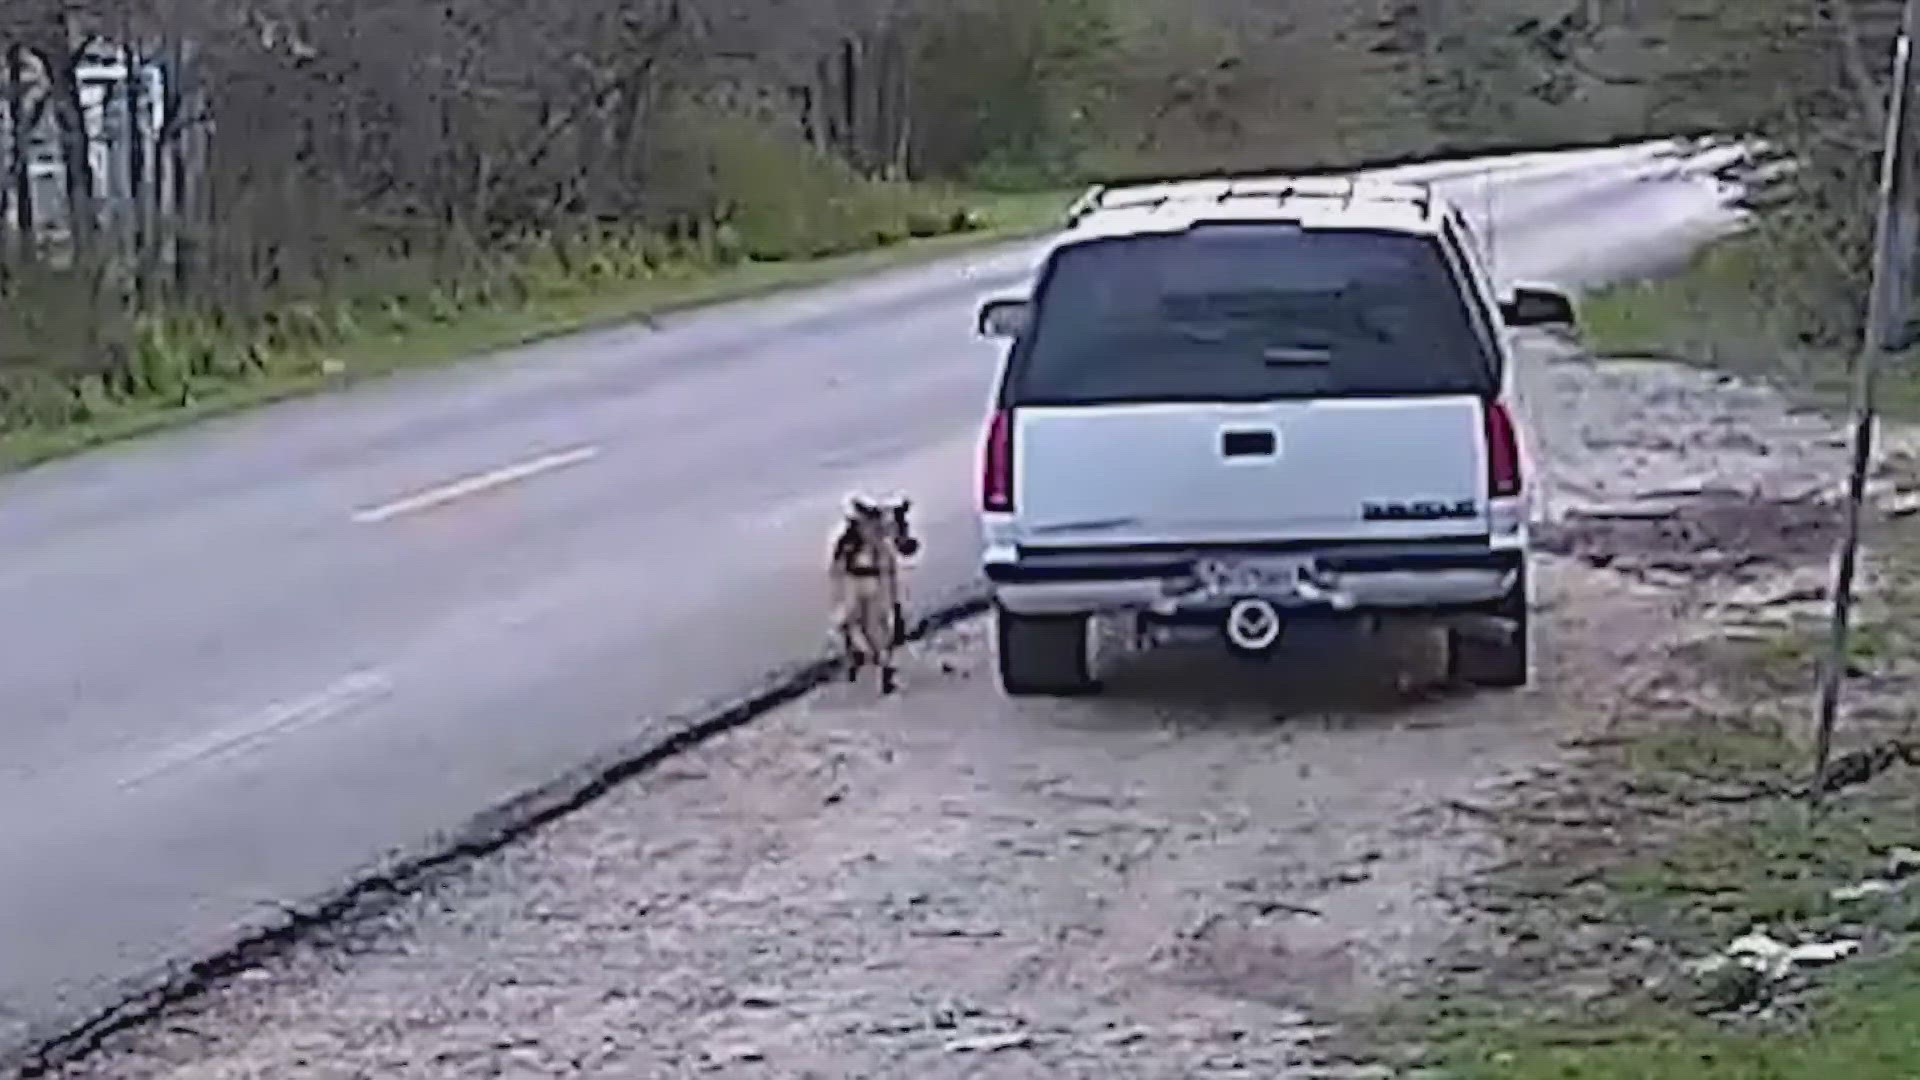 The dog can be seen chasing after the man as he drives away in an SUV.